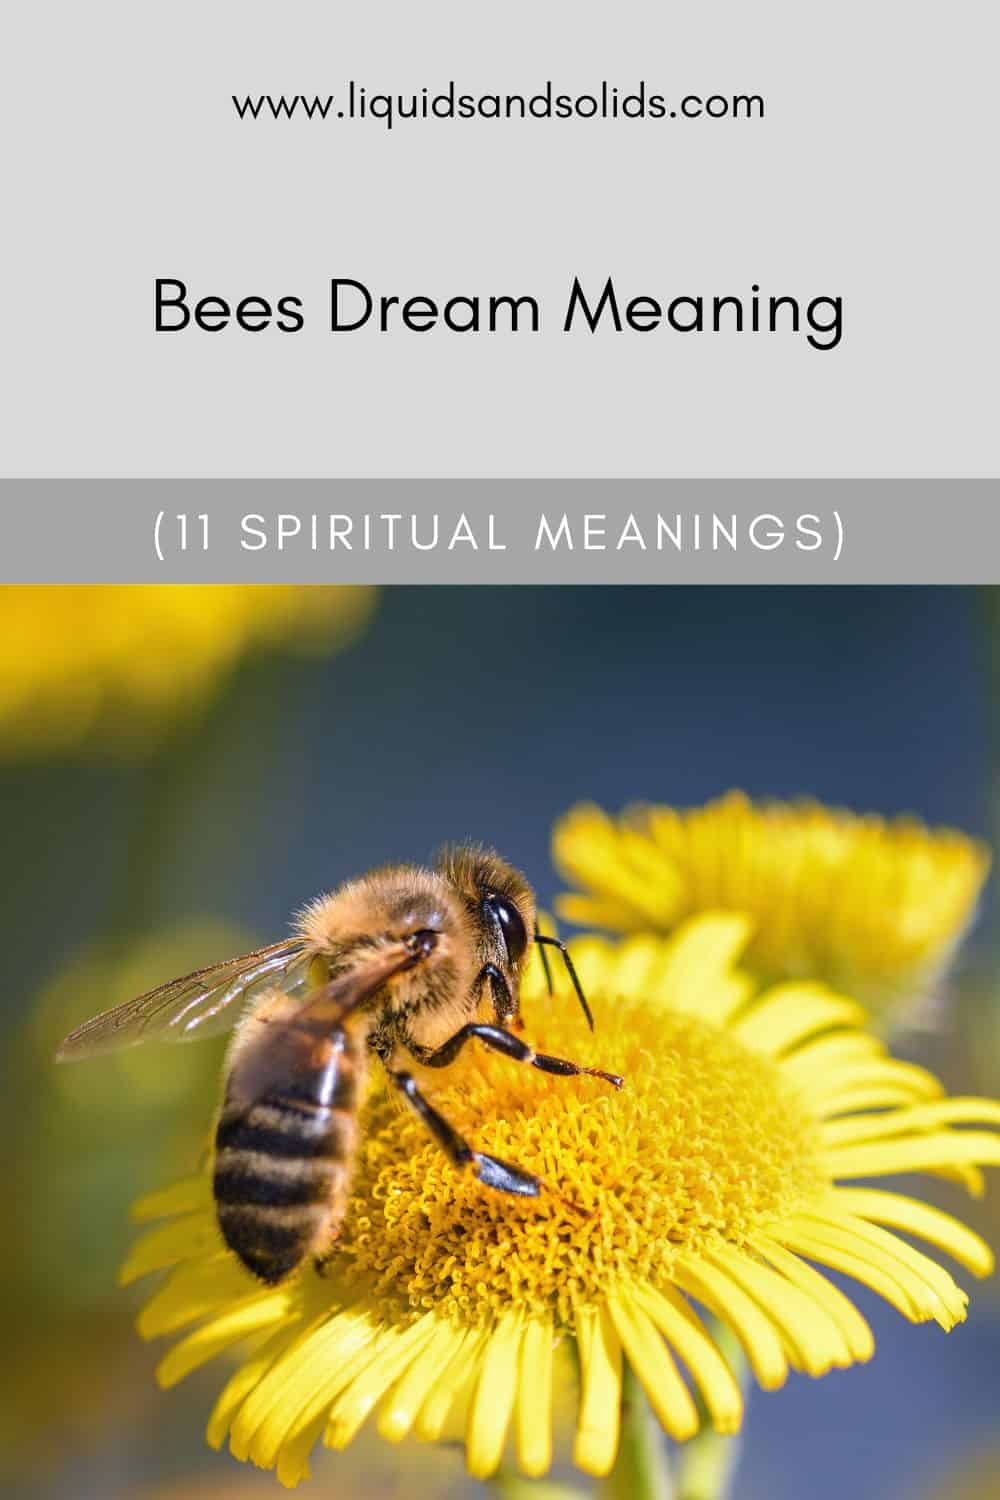 Dreaming of Bees: What Does It Mean?